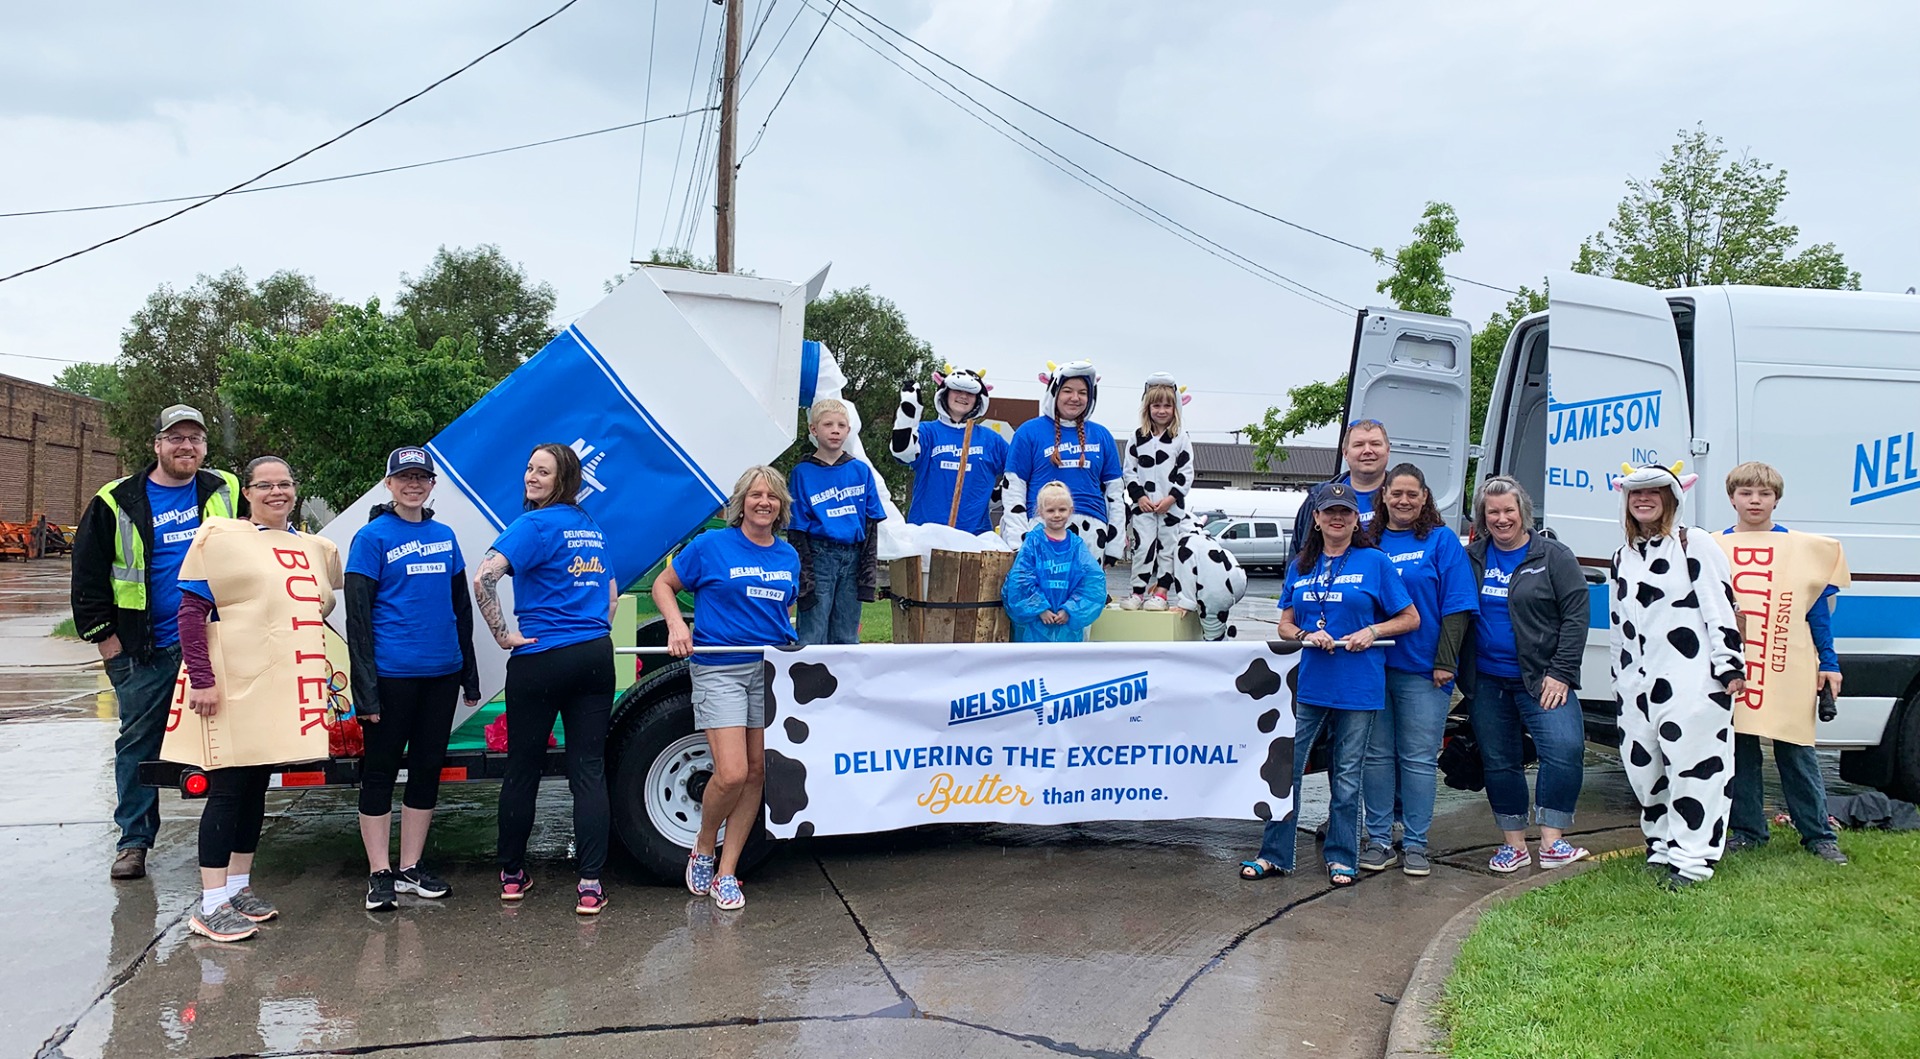 Food Processing Distributor Nelson-Jameson Celebrates National Dairy Month by Participating in Marshfield’s Dairyfest